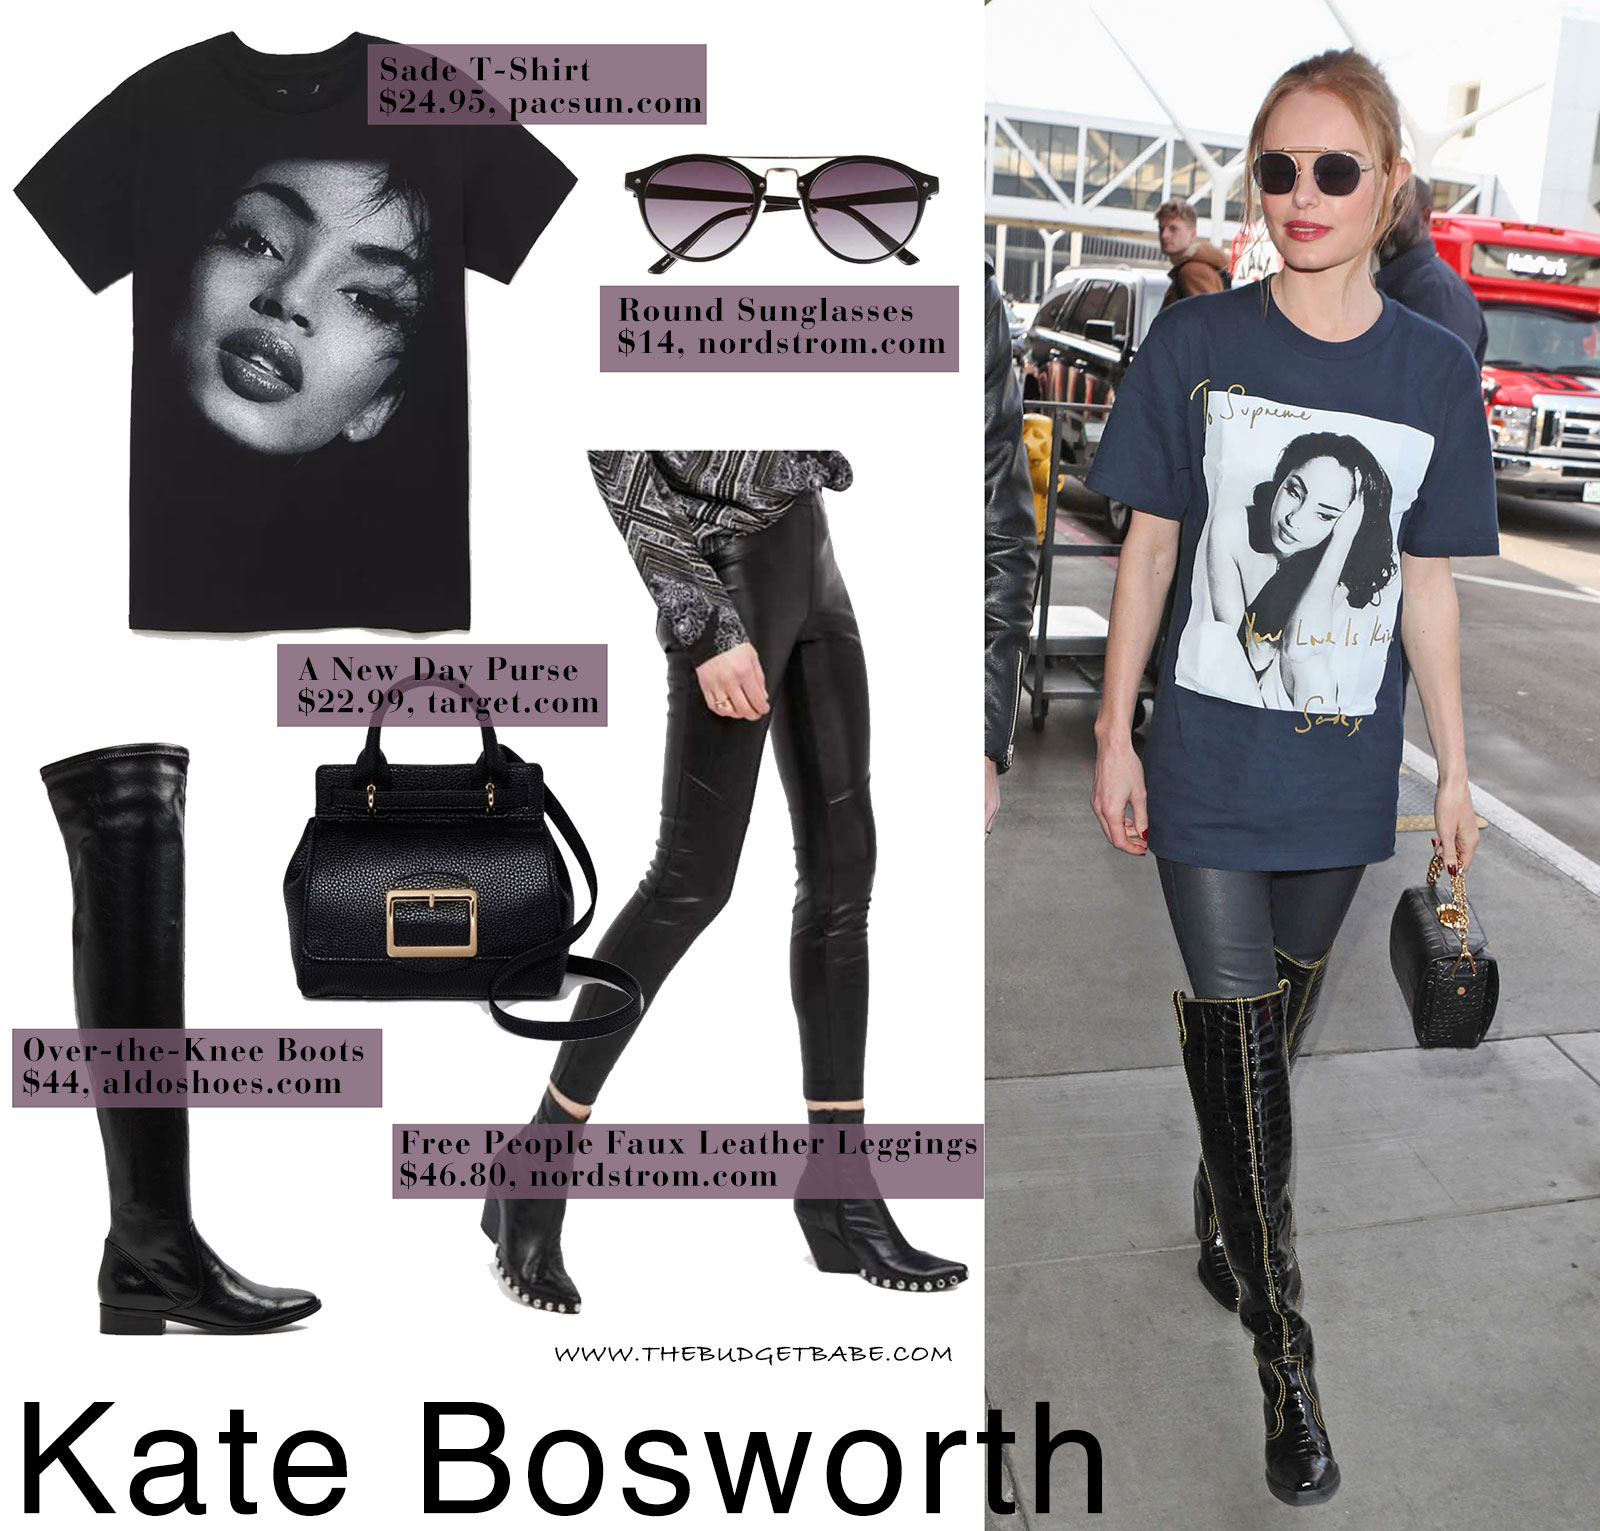 Kate Bosworth wears a Sade t-shirt by Supreme while making her way through LAX.